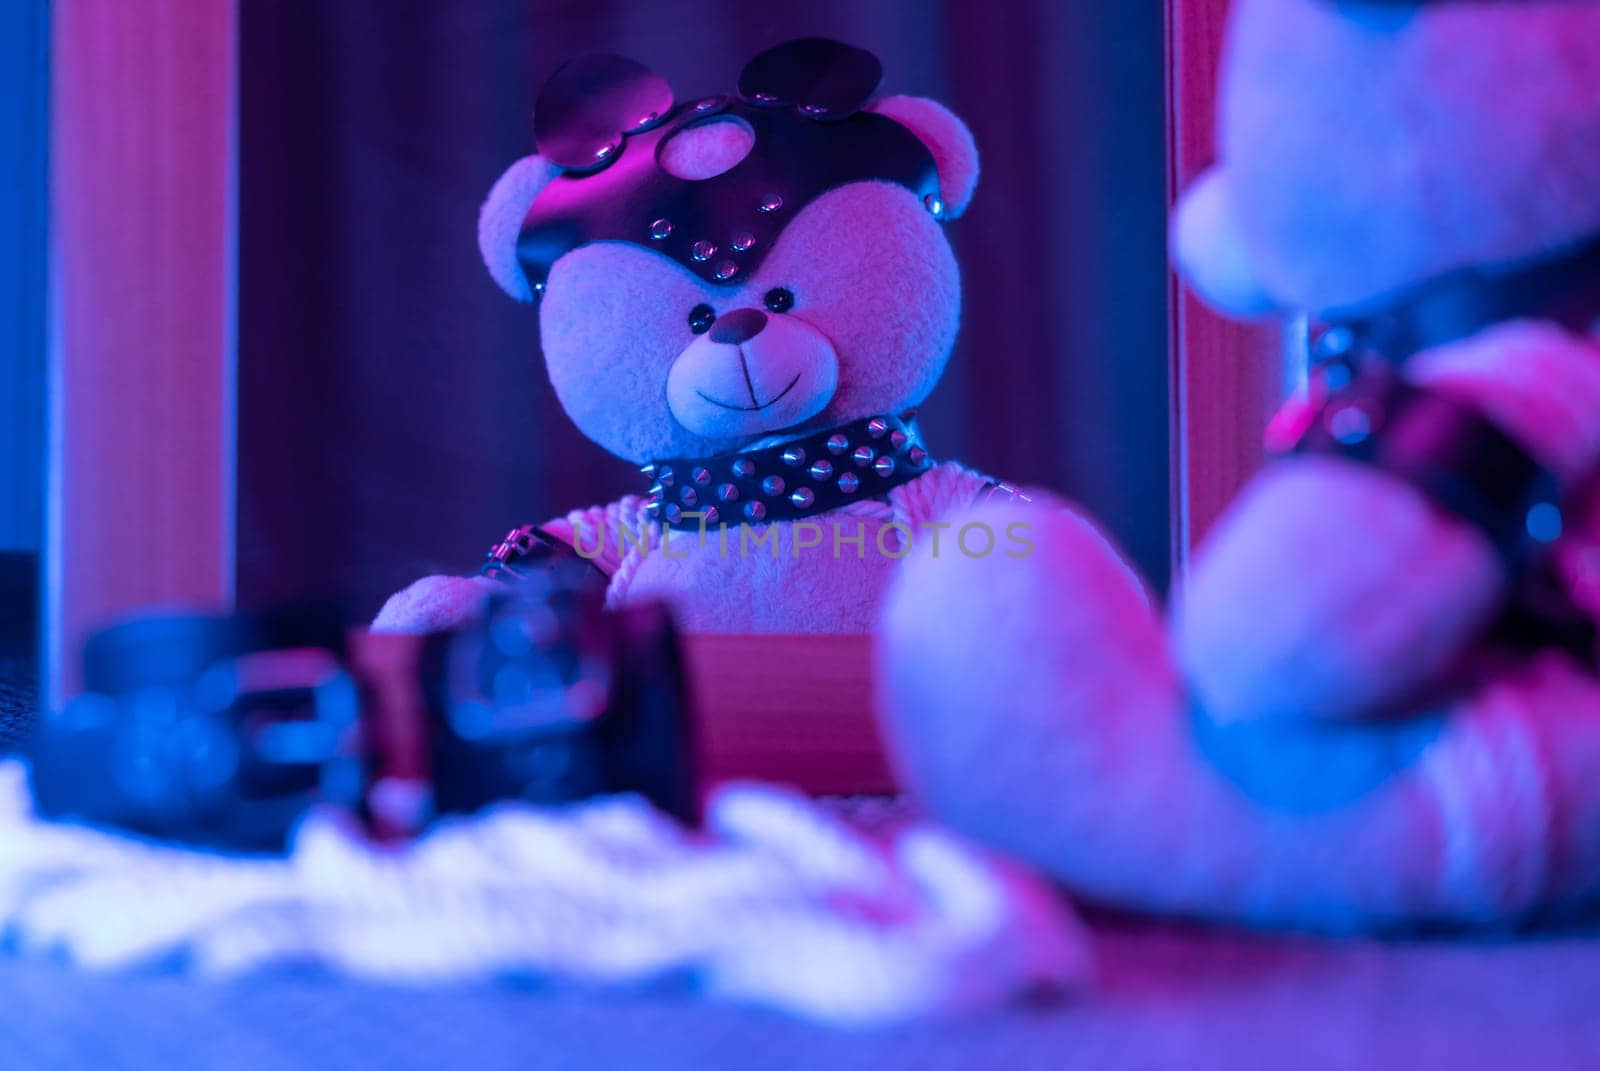 toy bear in leather harness and accessory for BDSM games on a dark background in neon light near the mirror by Rotozey